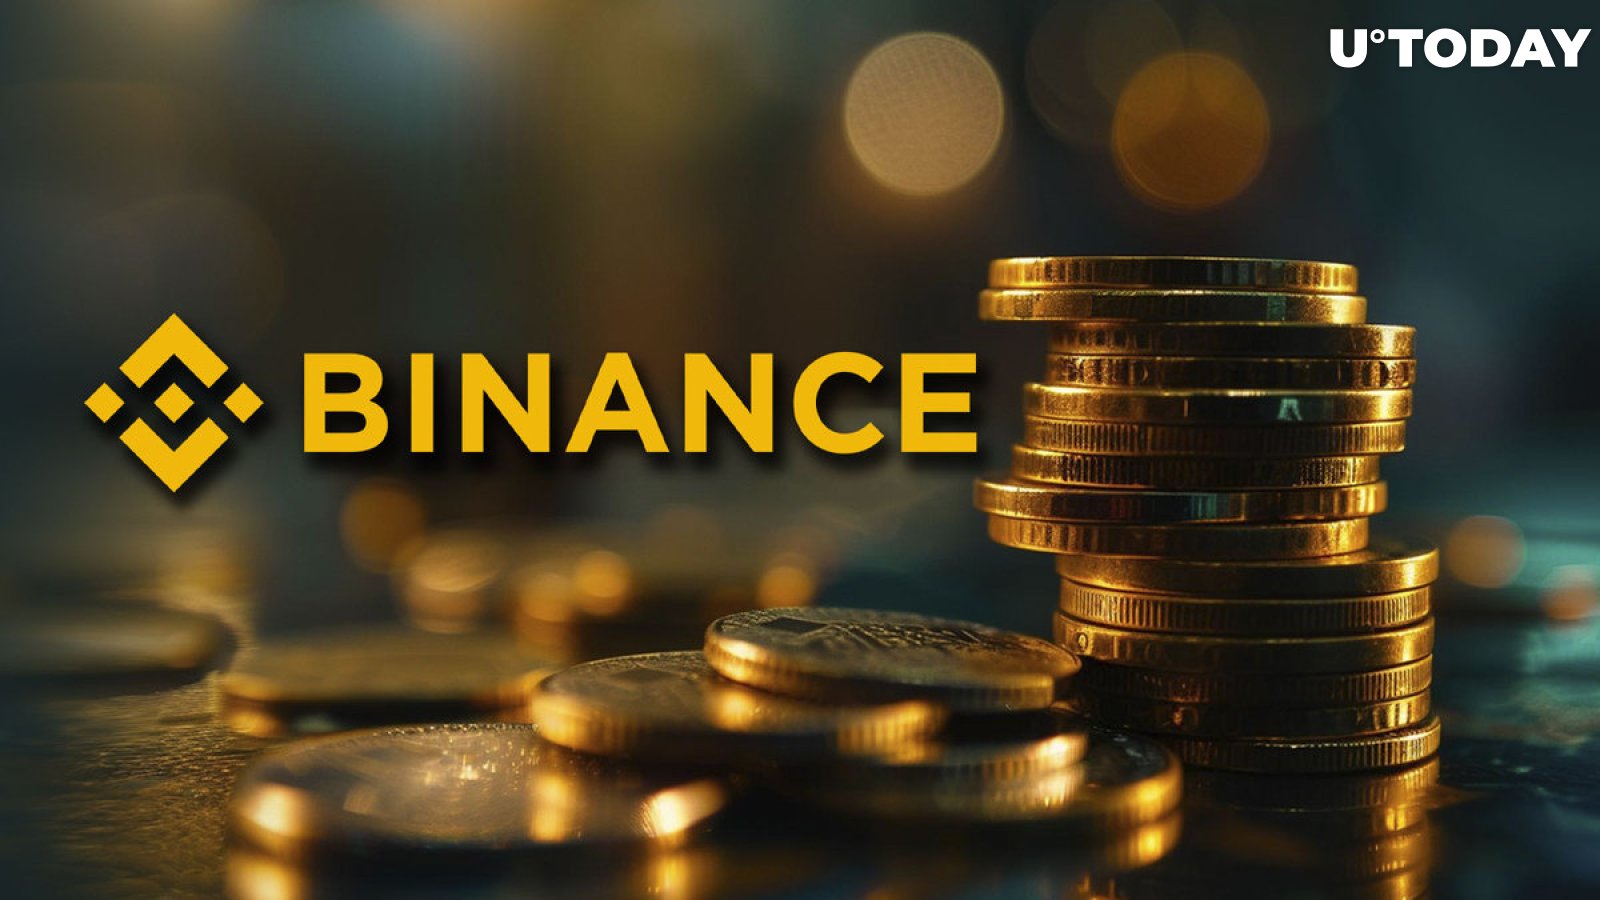 Binance to List Six Major Trading Pairs: Details